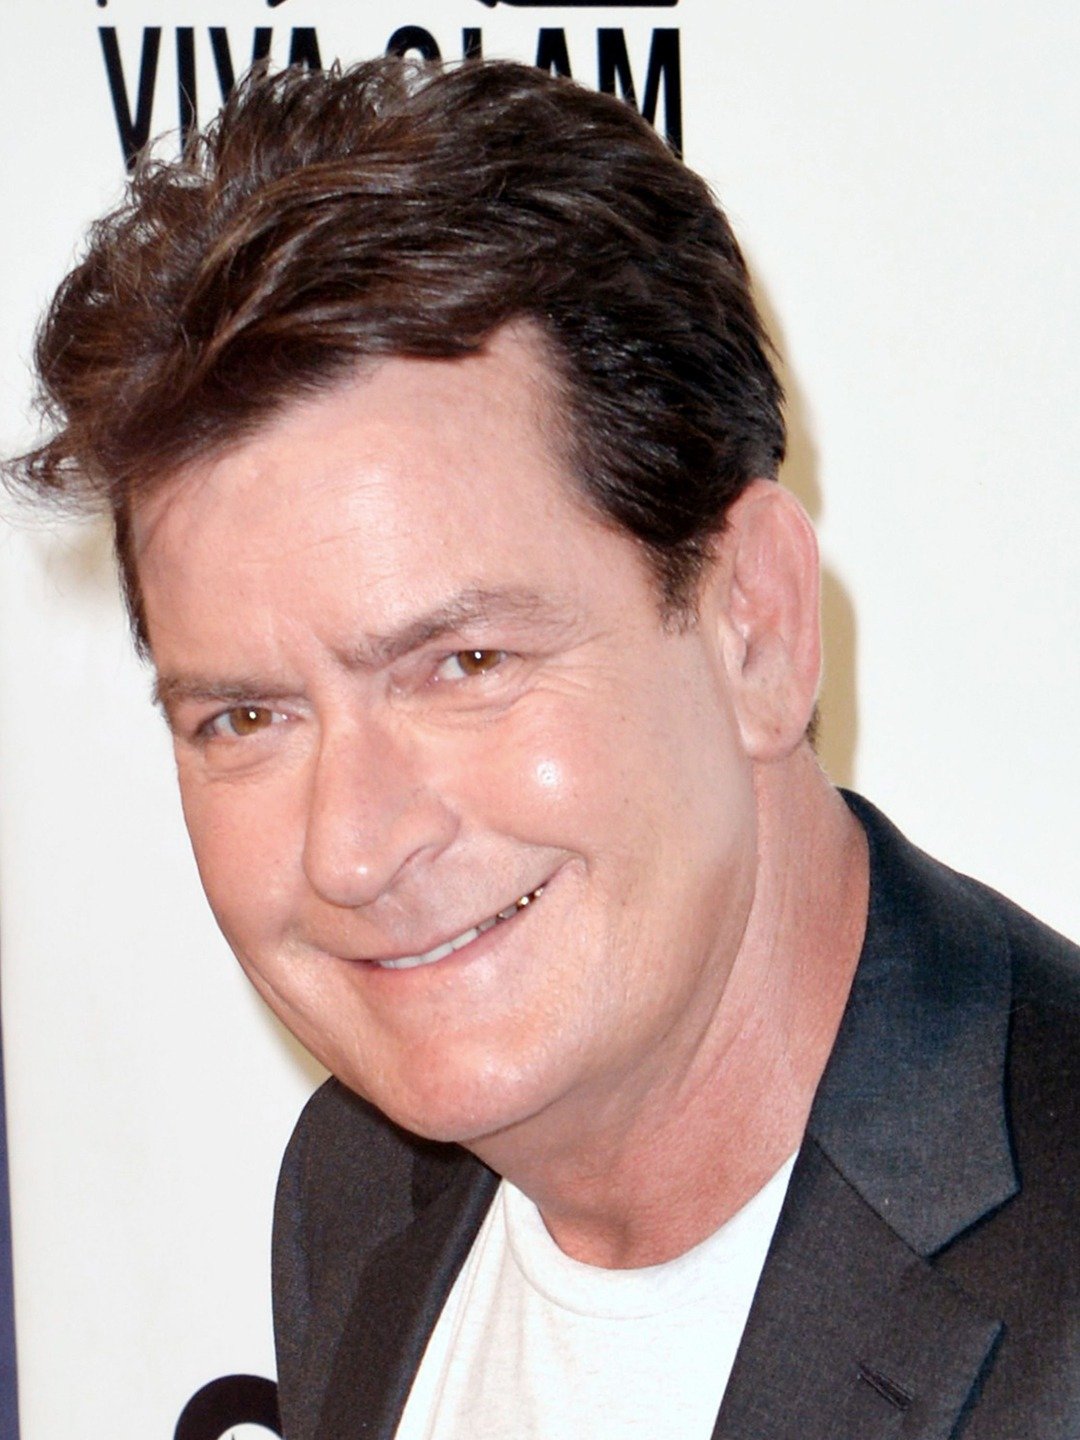 Major League Charlie Sheen Haircut What Hairstyle Should I Get 